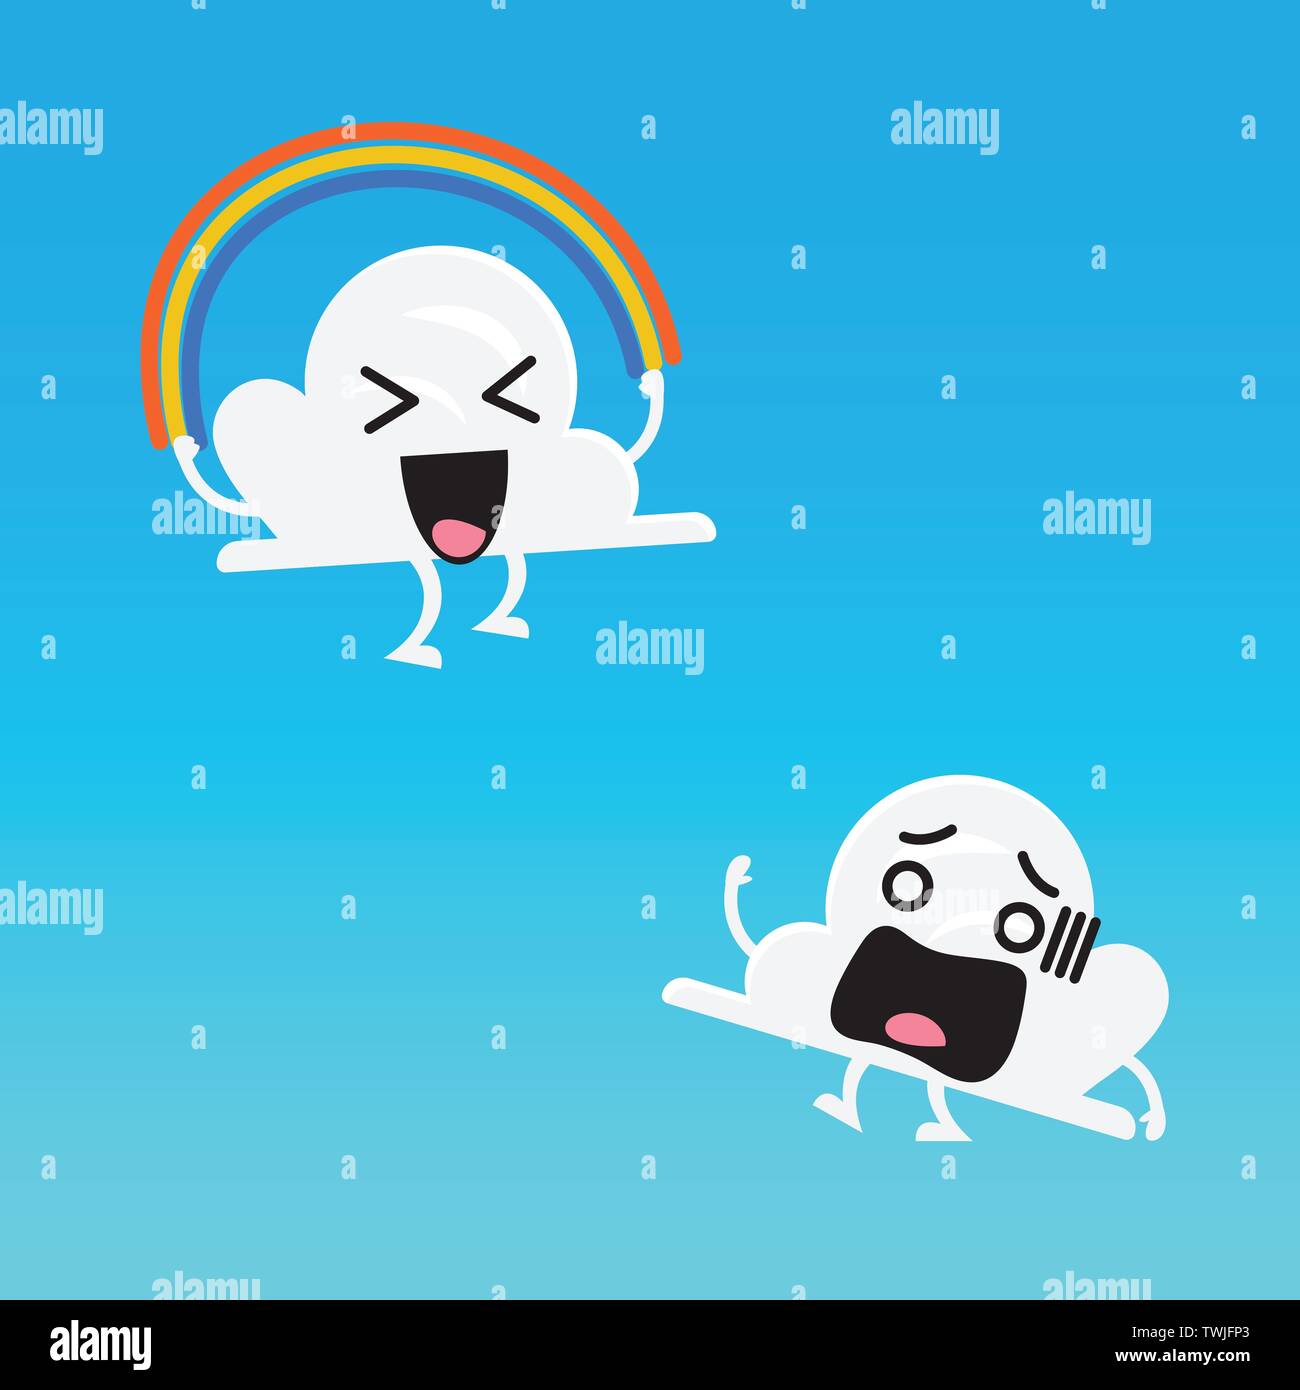 Cloud character and friend jumping rainbow rope. Vector illustration Stock Vector